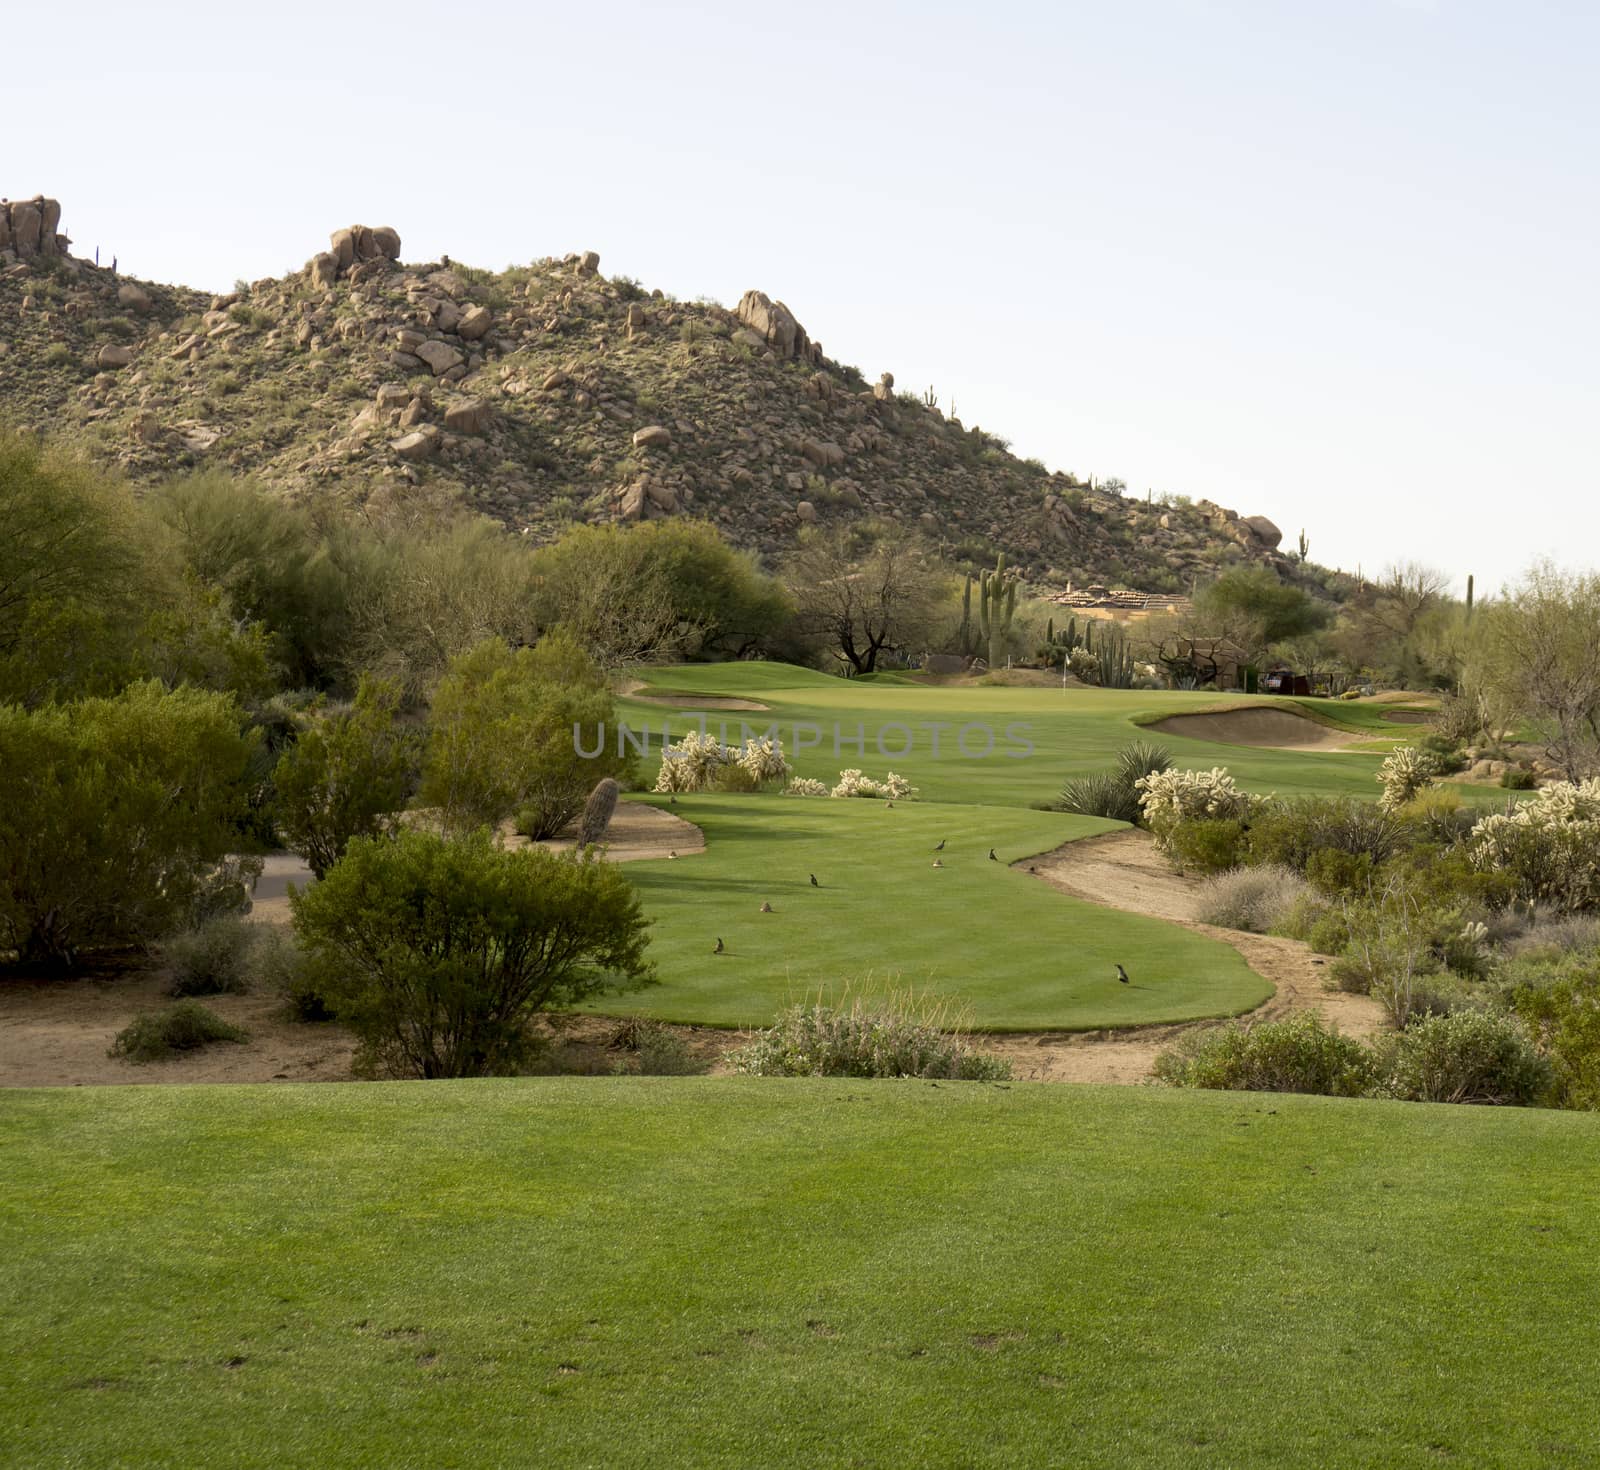 Golf course landscape desert mountain scenic view by Paulmatthewphoto